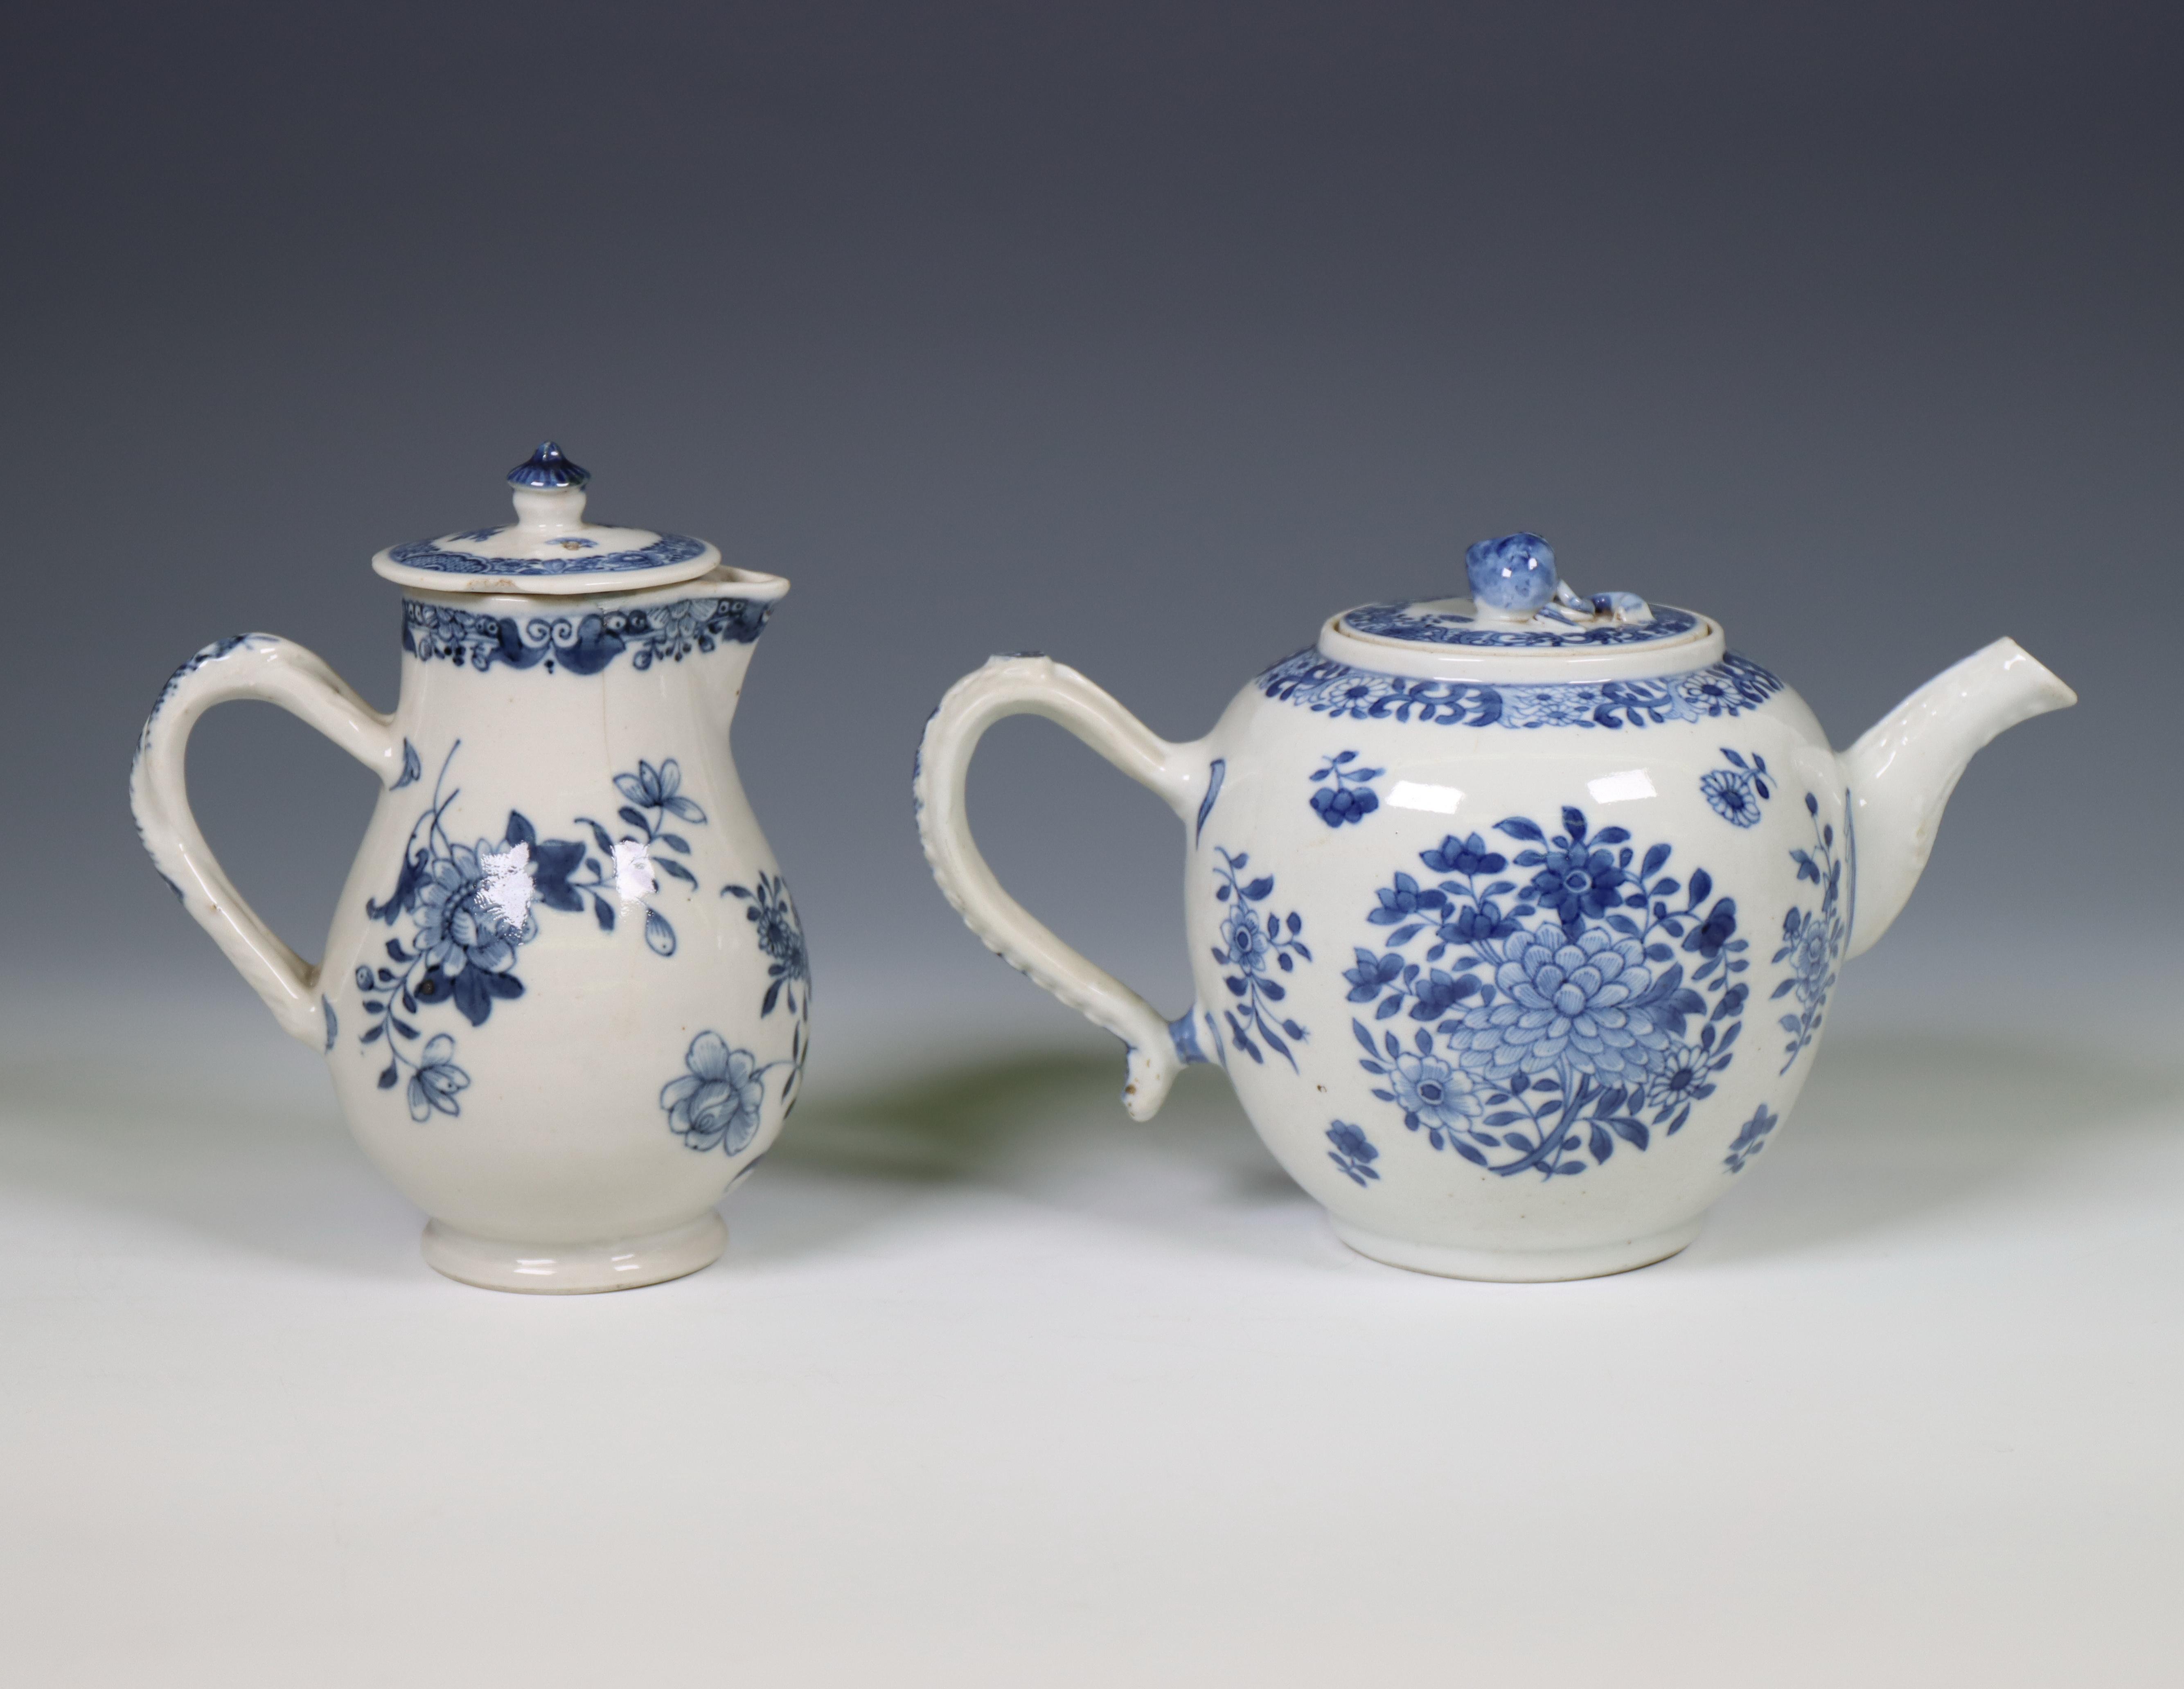 China, a blue and white porcelain teapot and a milk-jug, 18th century, - Image 2 of 6